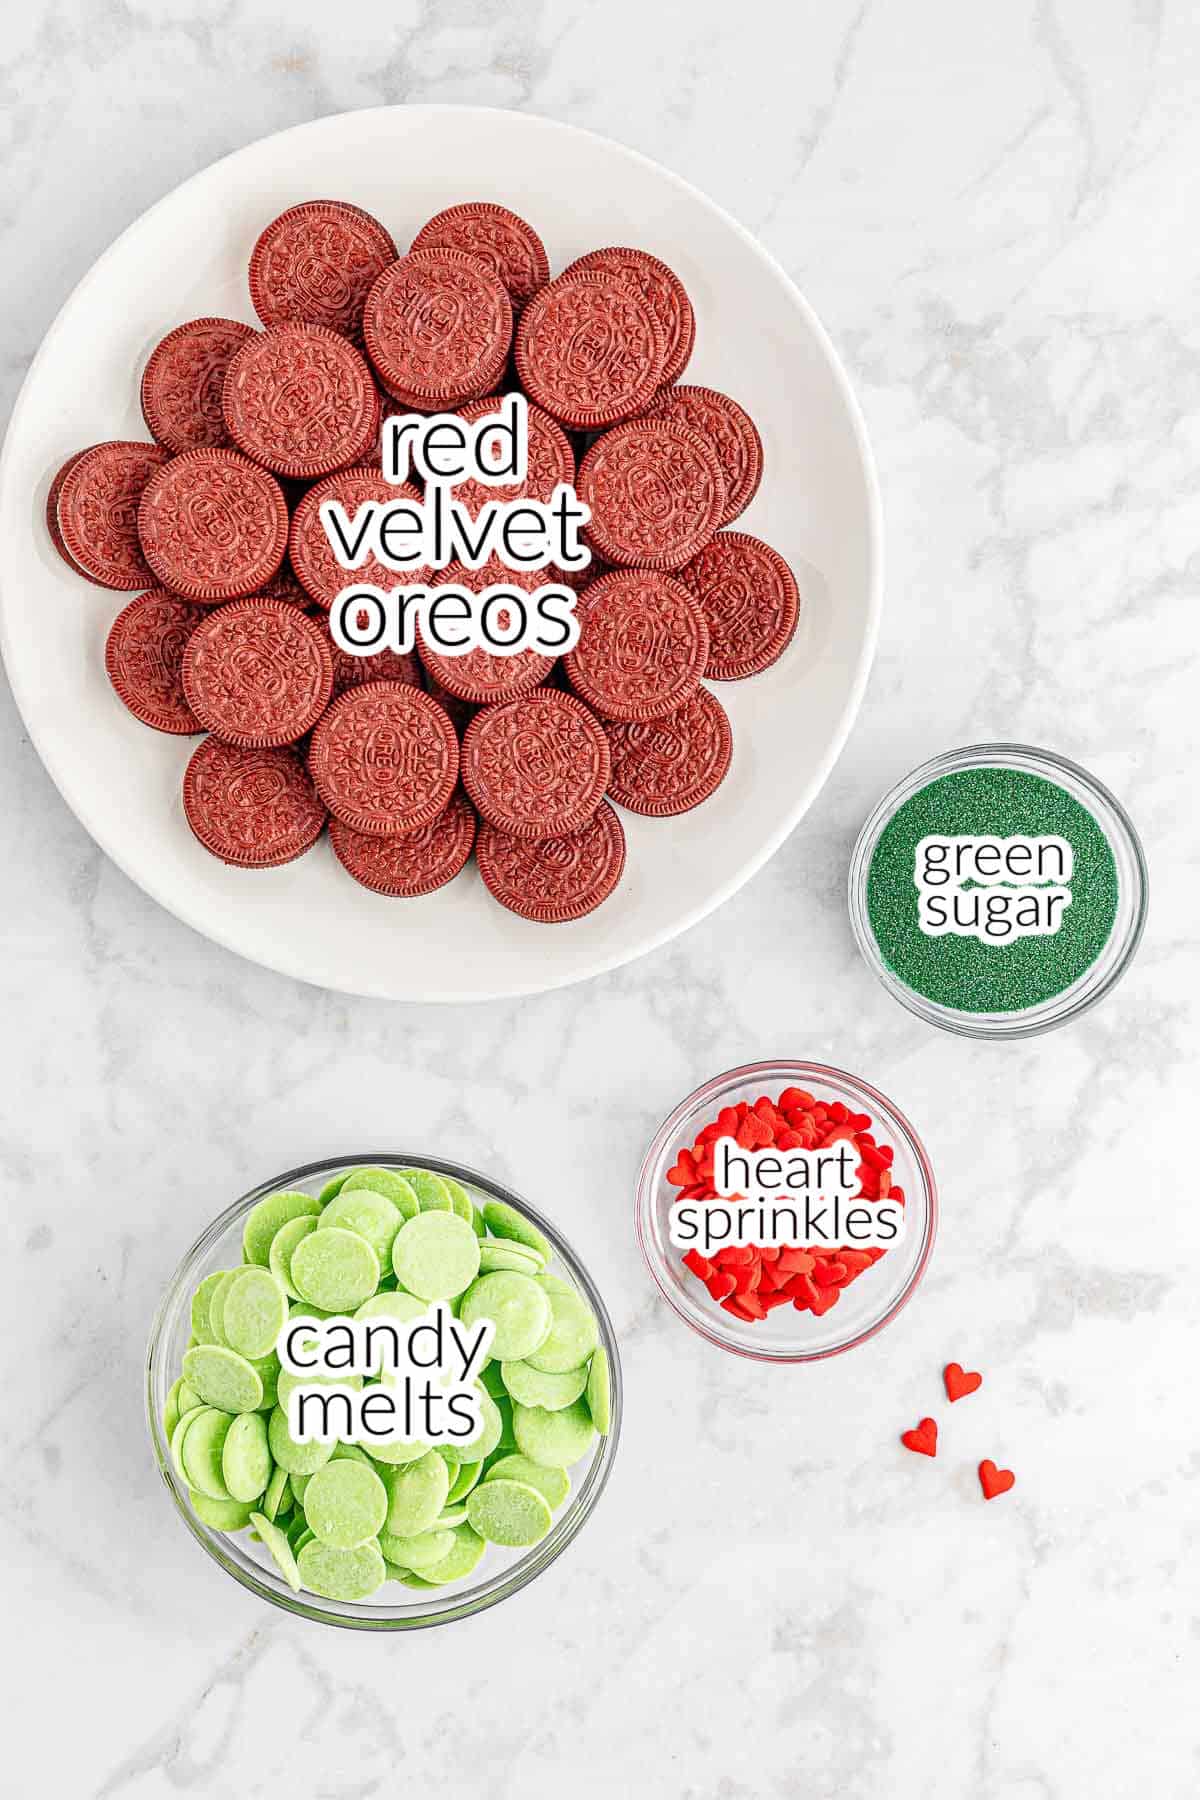 Ingredients for grinch oreos - red velvet oreos, green sugar, candy melts and heart sprinkles.